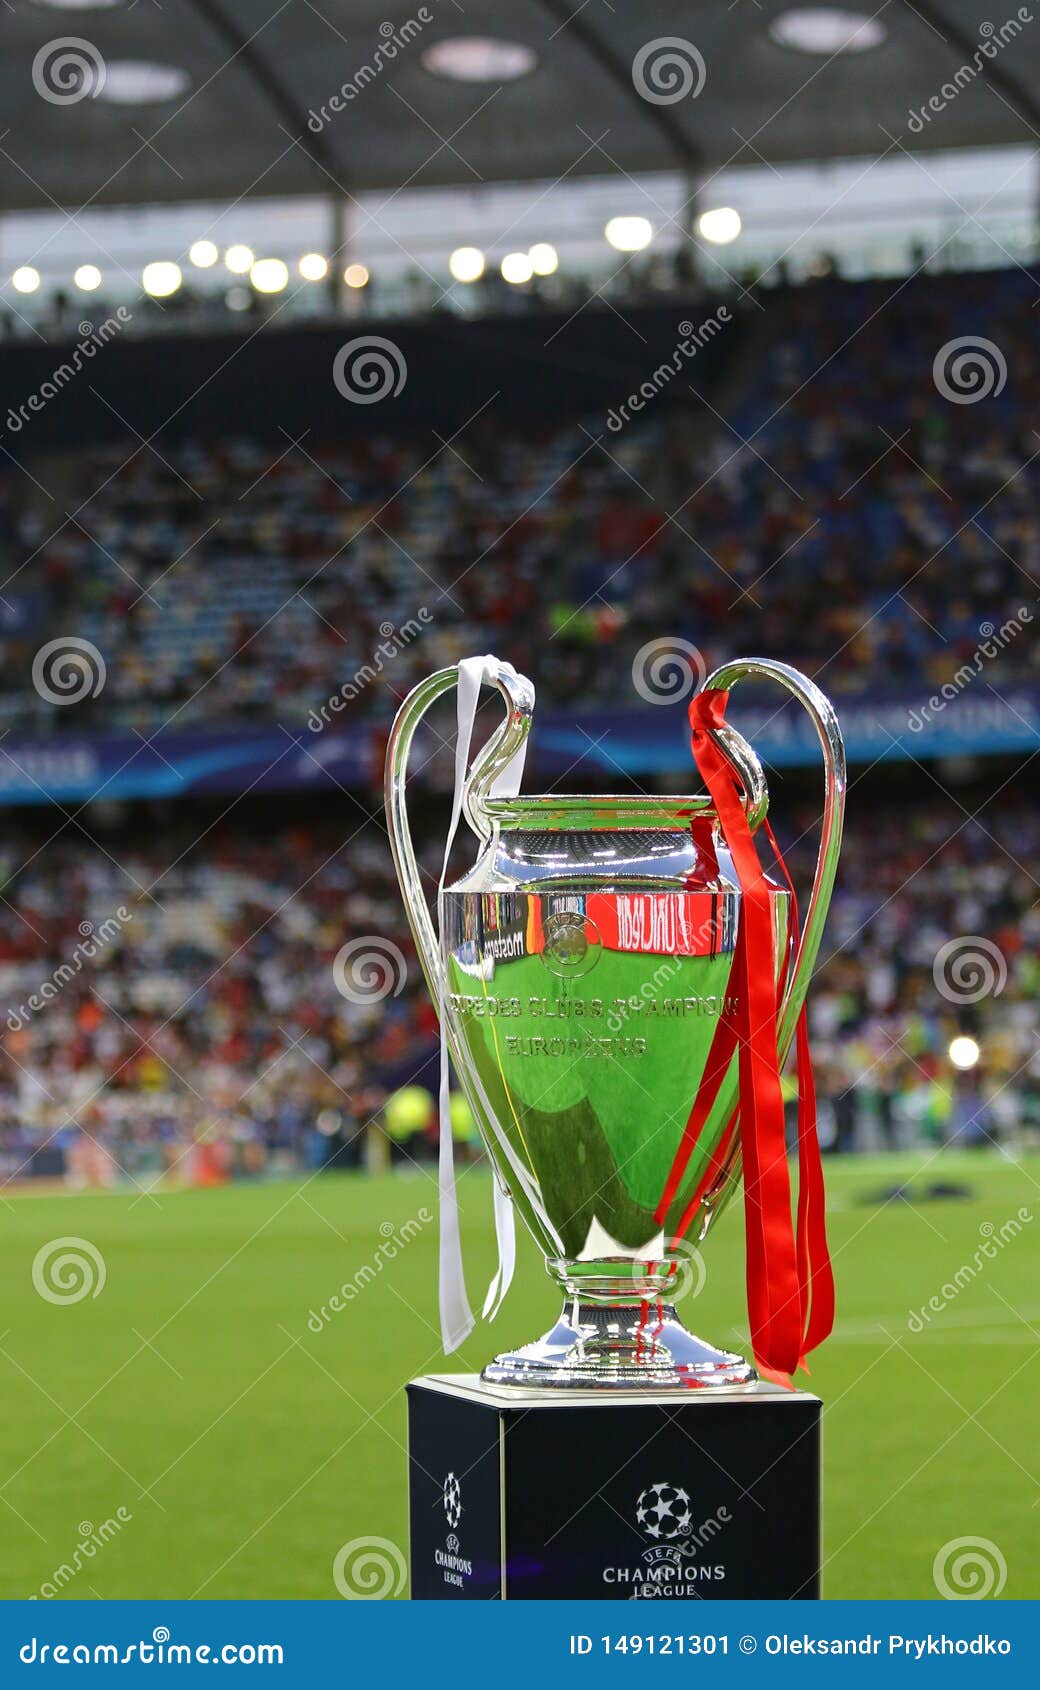 2 970 Champions League Trophy Photos Free Royalty Free Stock Photos From Dreamstime